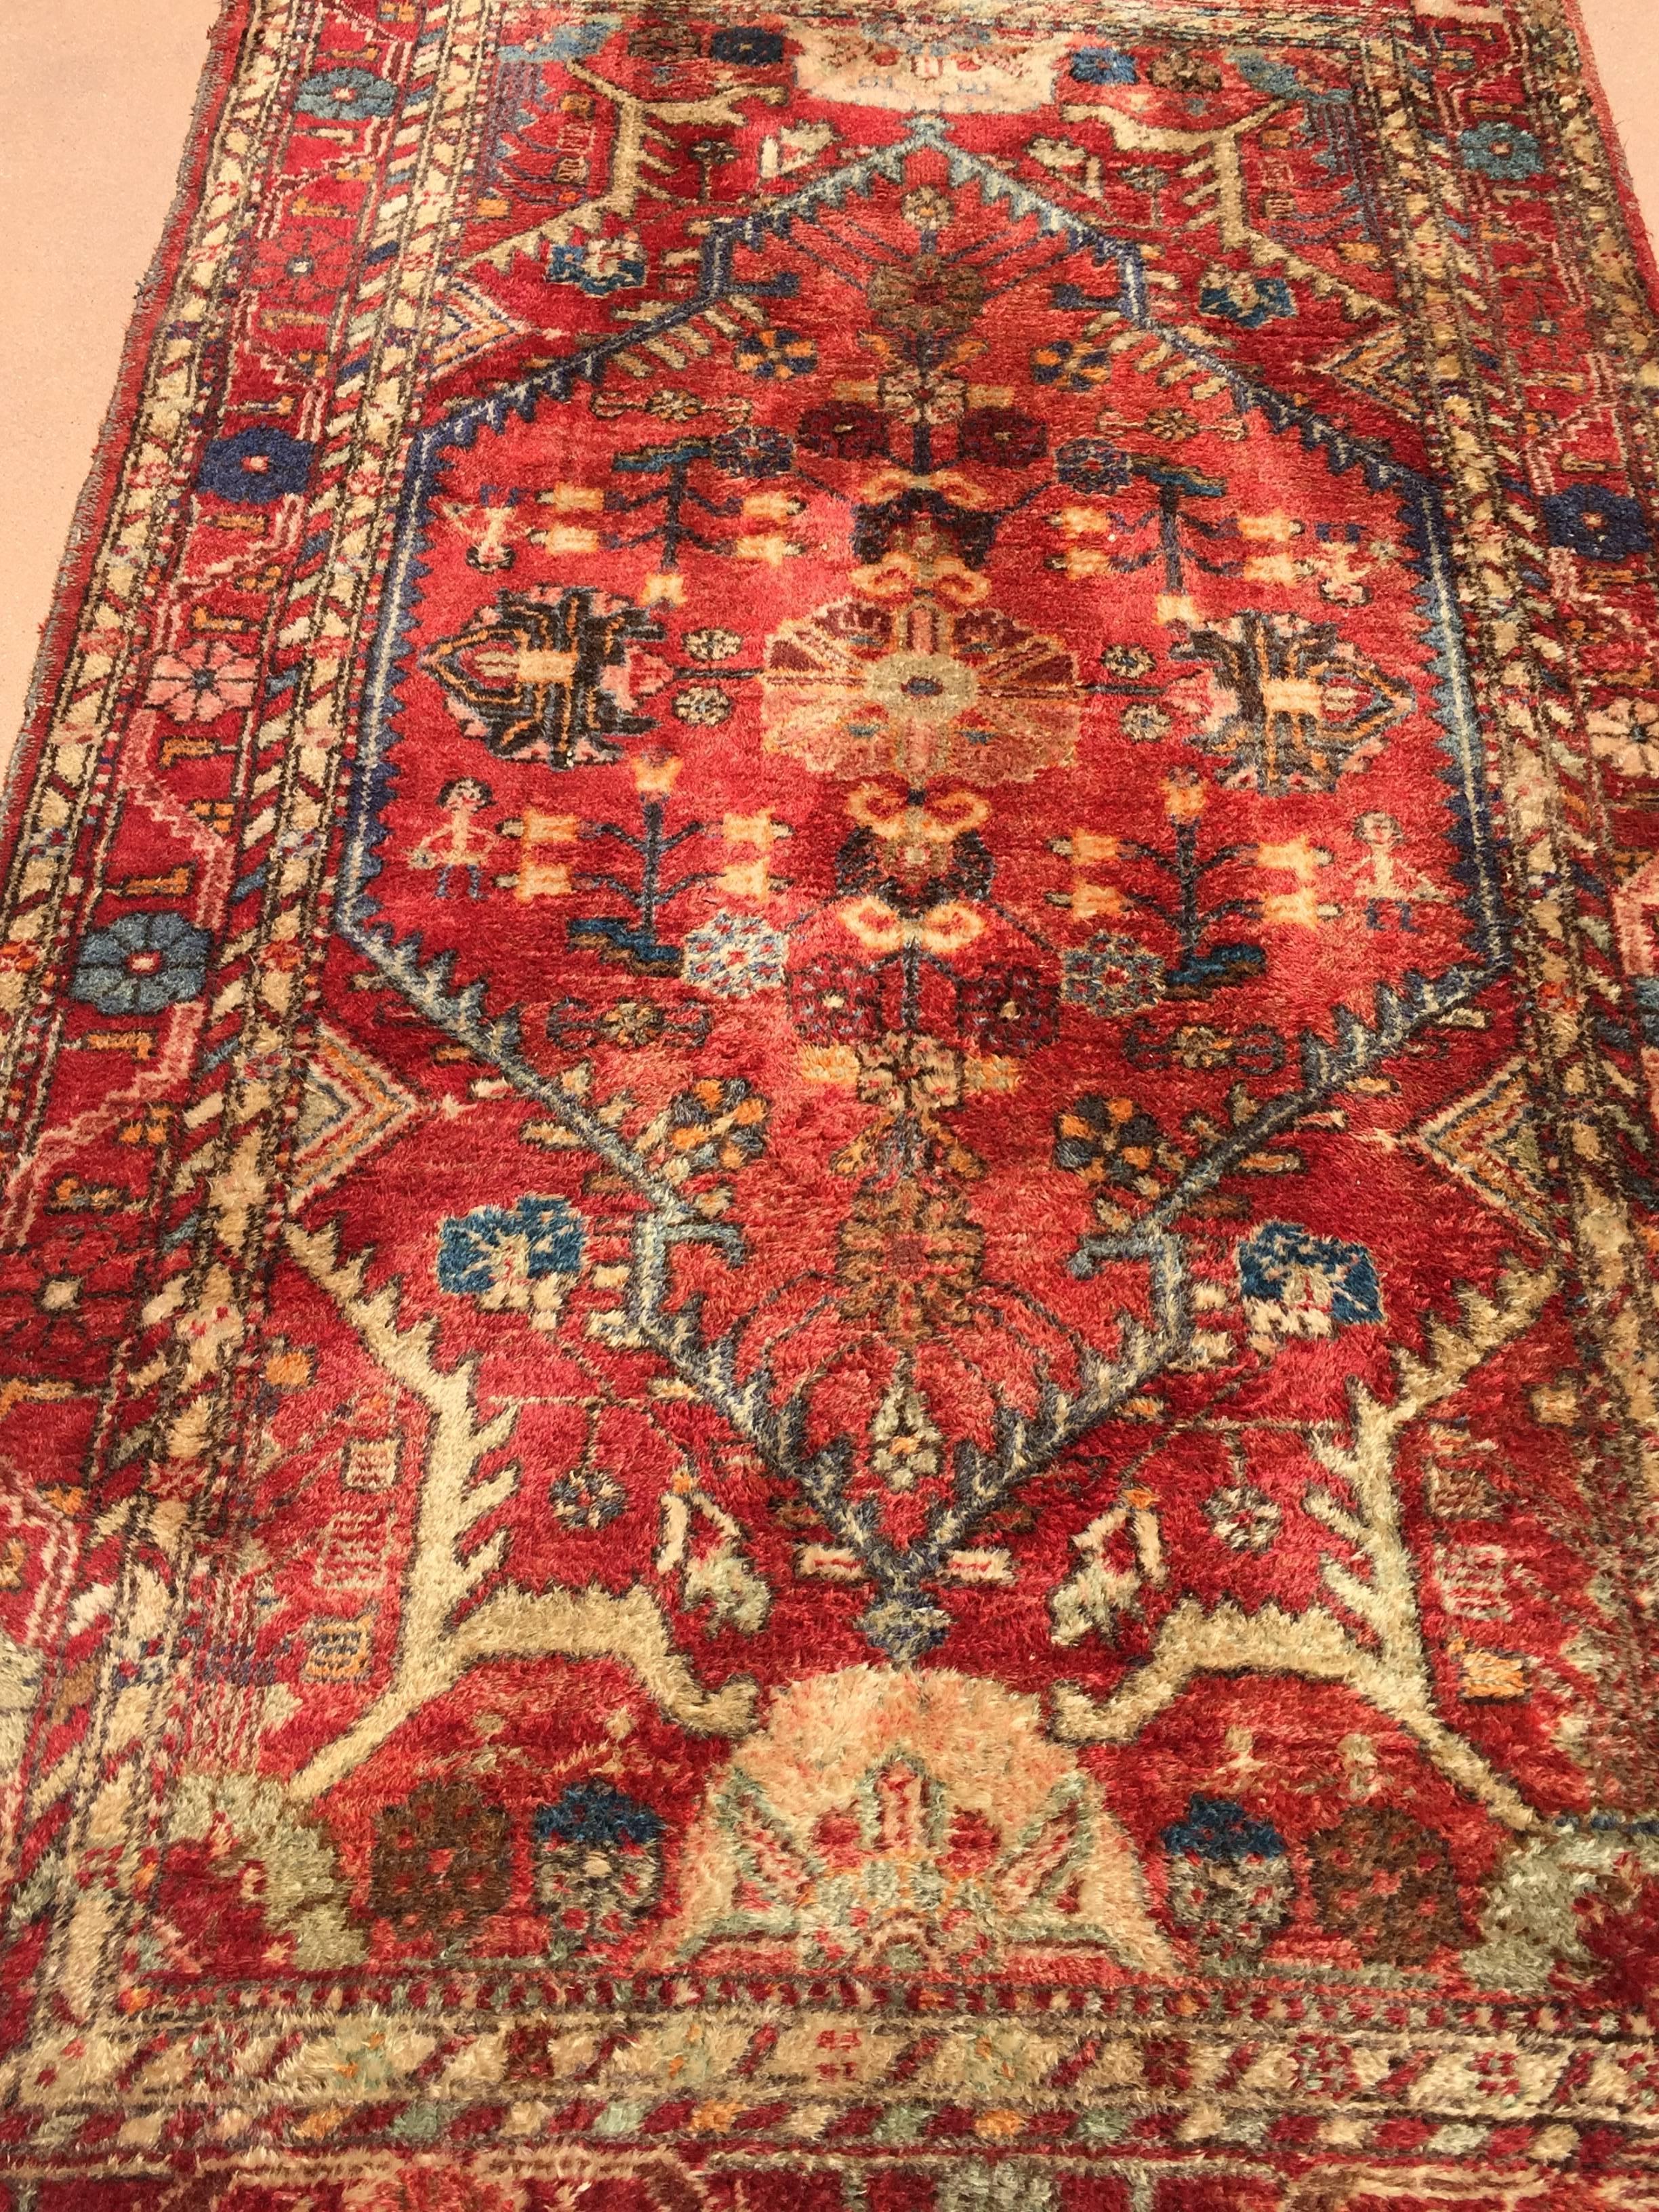 20th Century Hand-Knotted Rug from Turkey